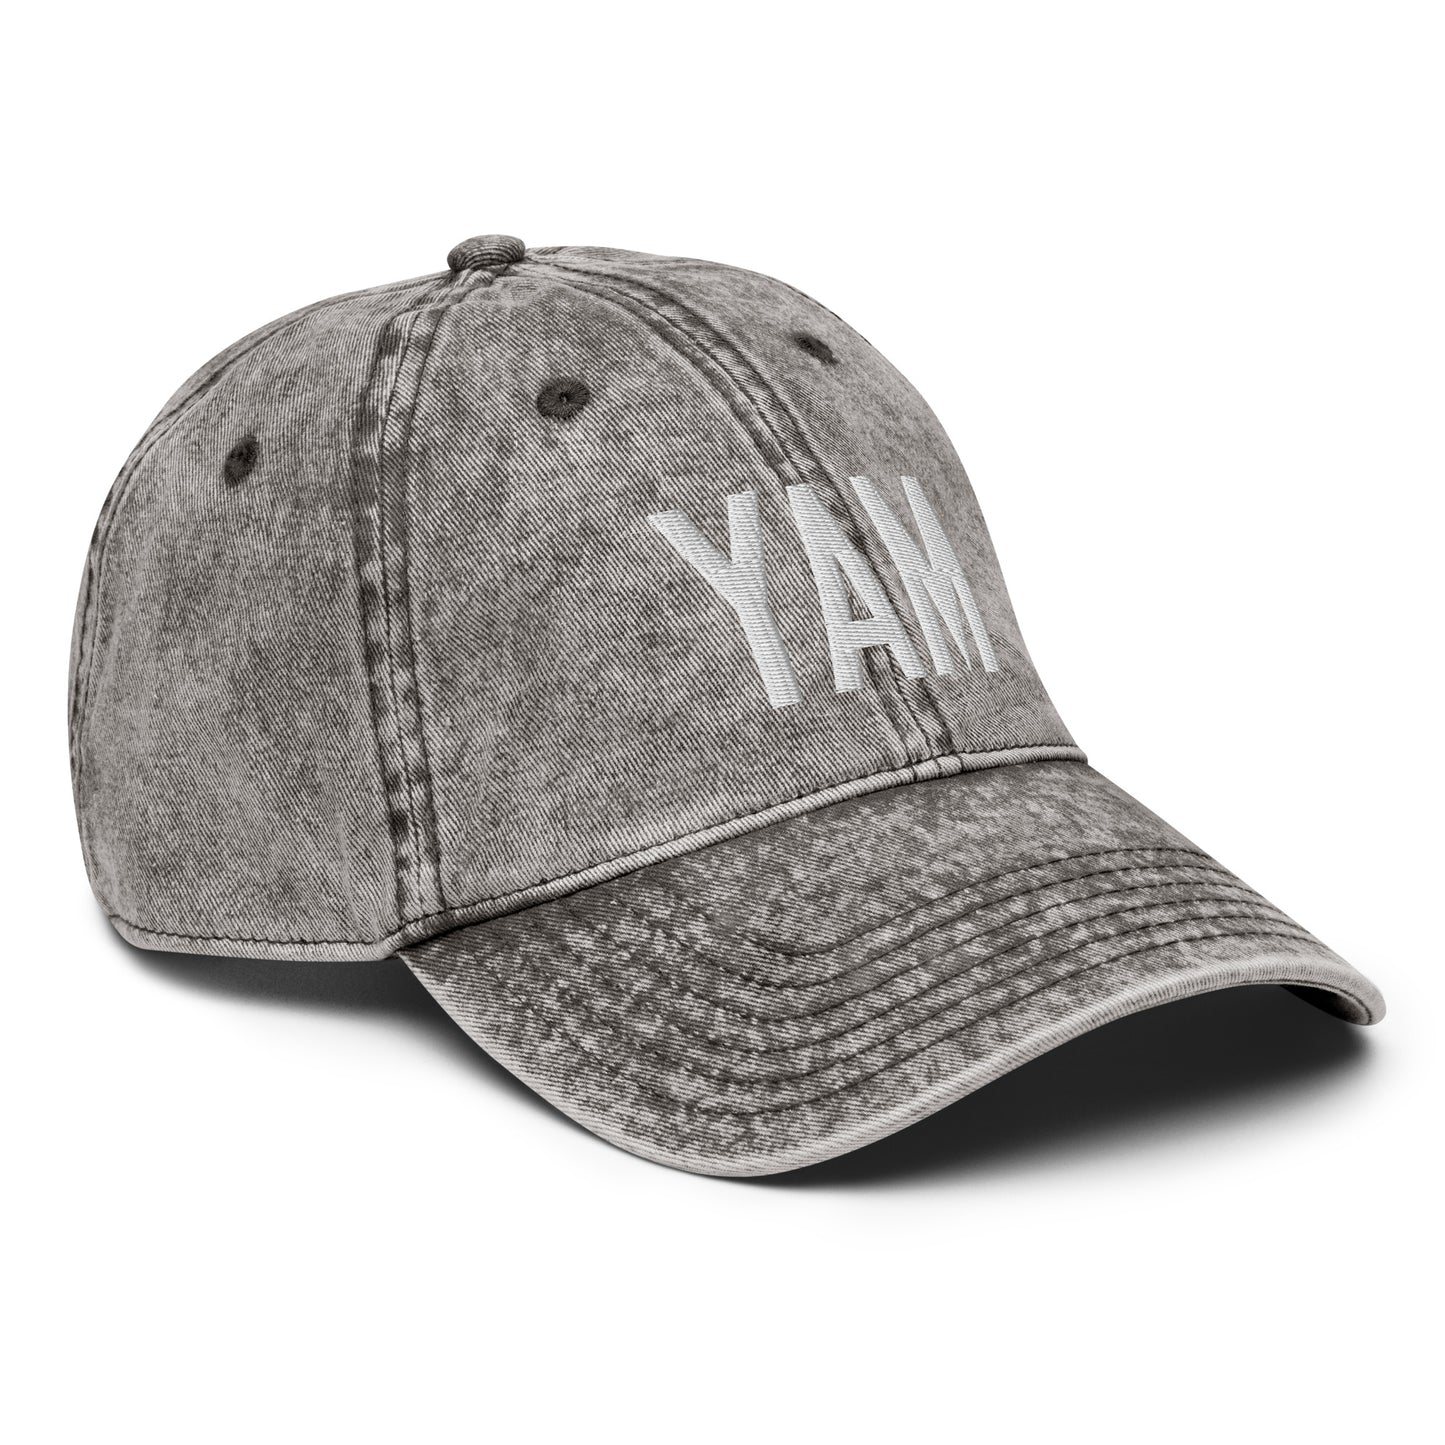 Airport Code Twill Cap - White • YAM Sault-Ste-Marie • YHM Designs - Image 30